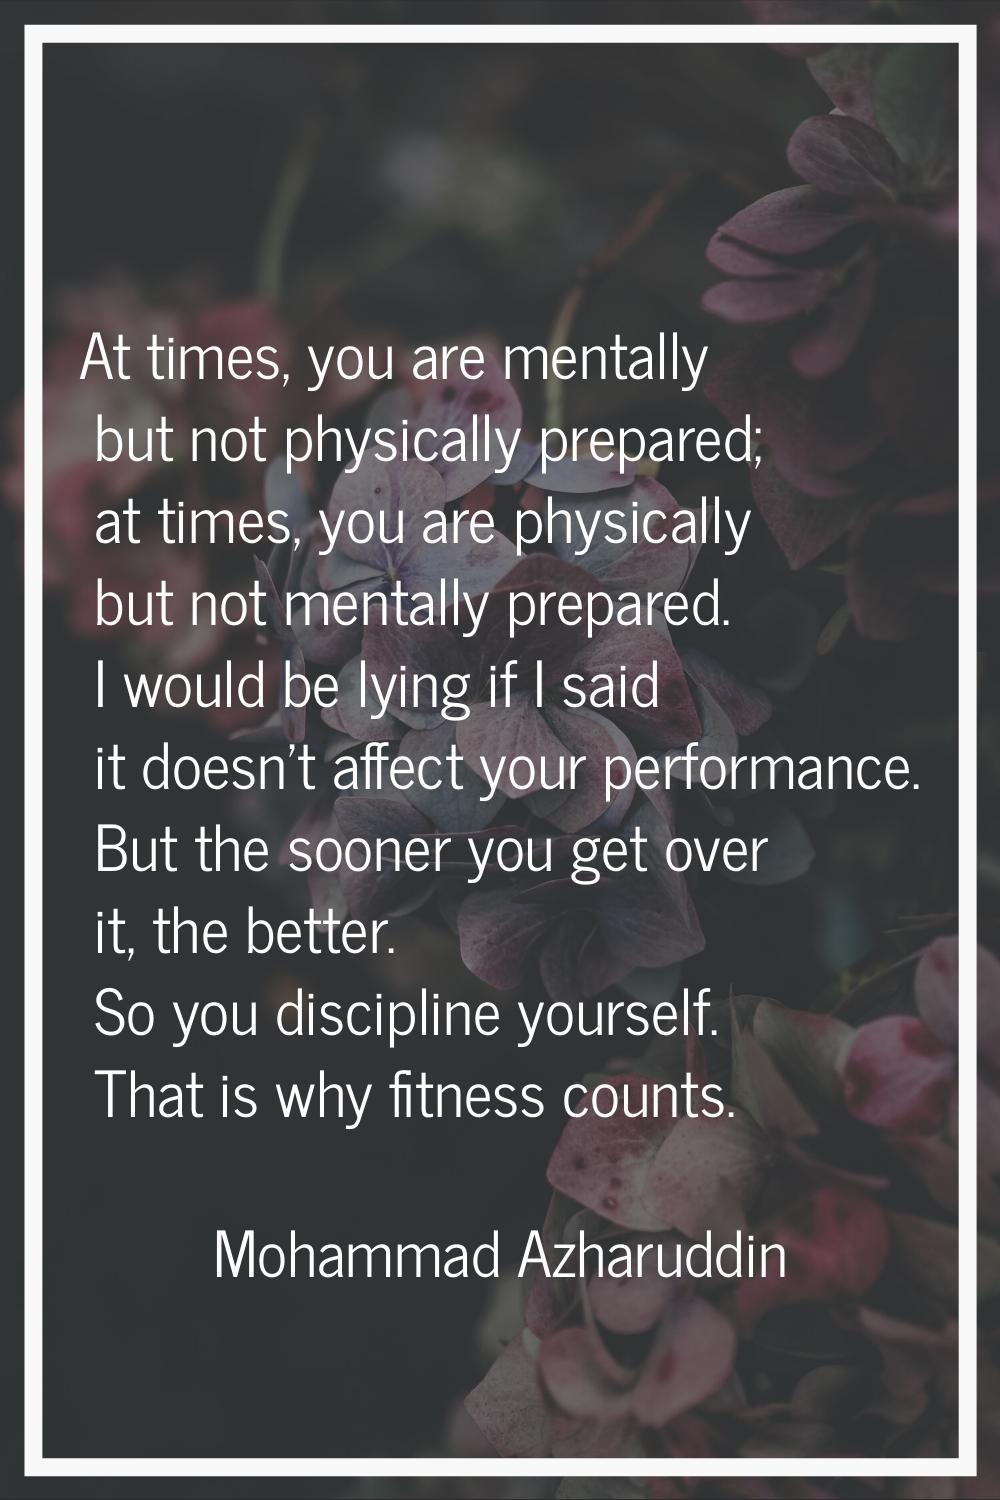 At times, you are mentally but not physically prepared; at times, you are physically but not mental